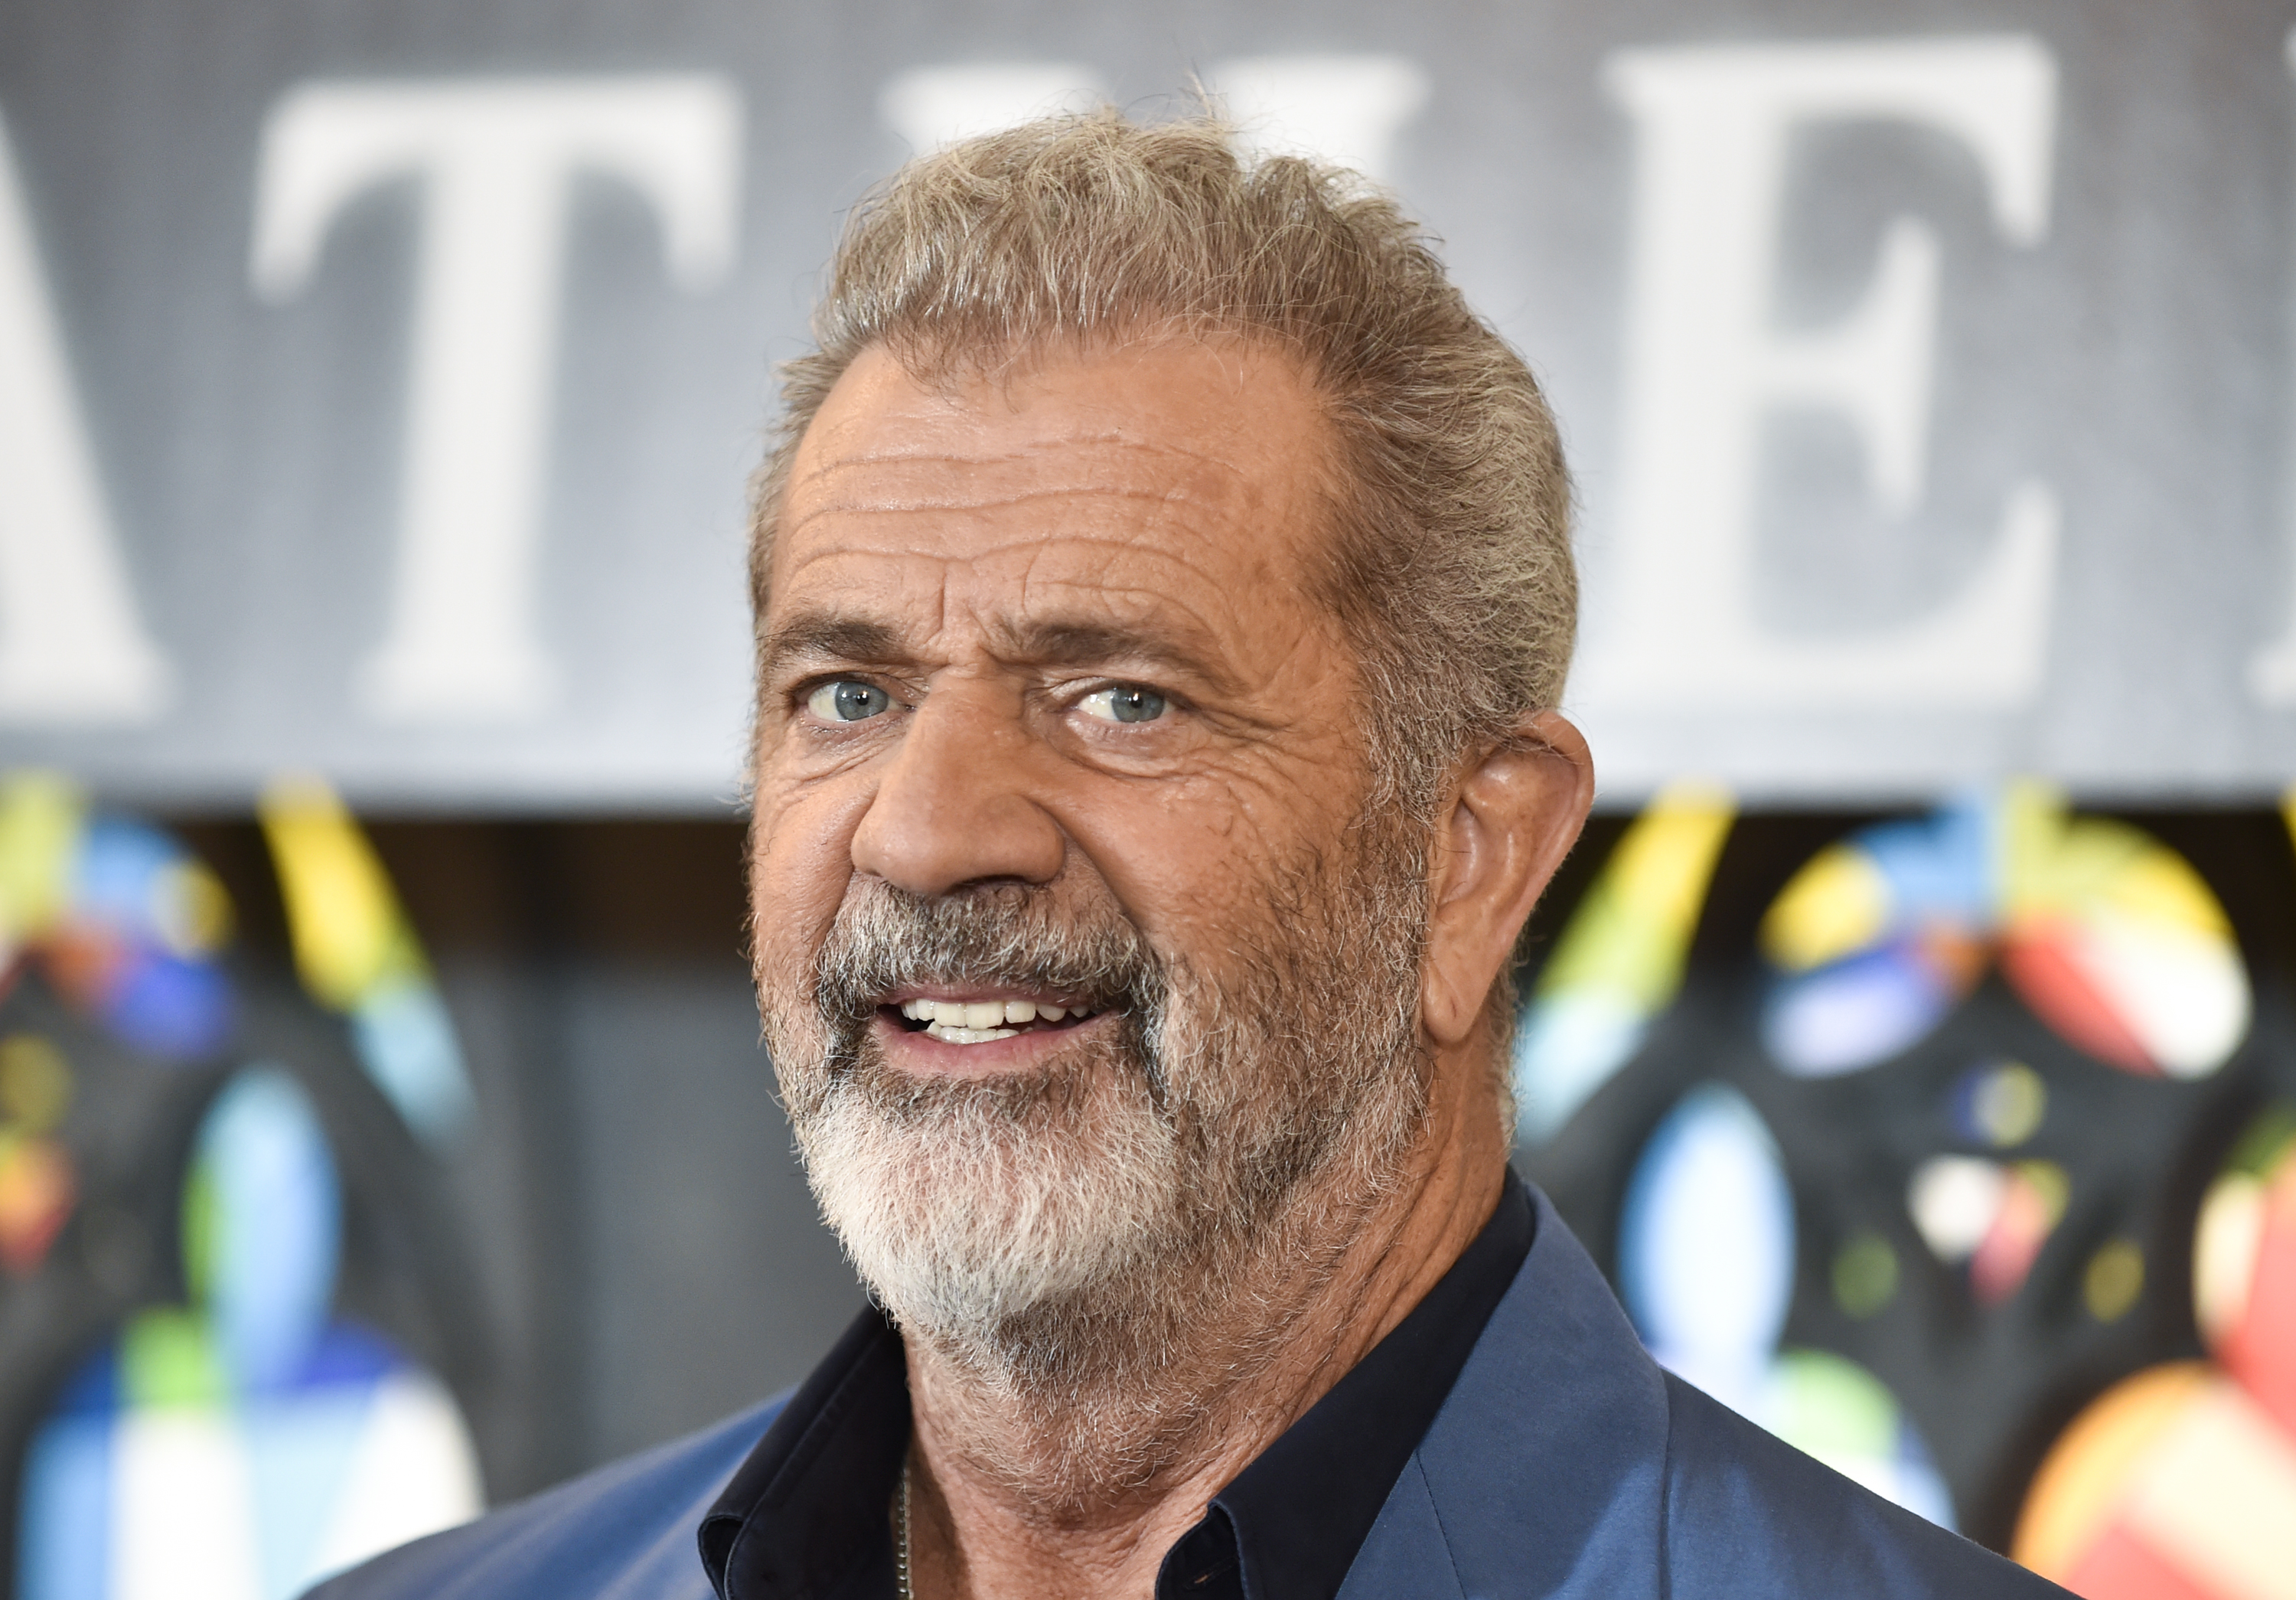 mel Gibson Interview Cut Short Over Question About Will Smith Oscars Slap